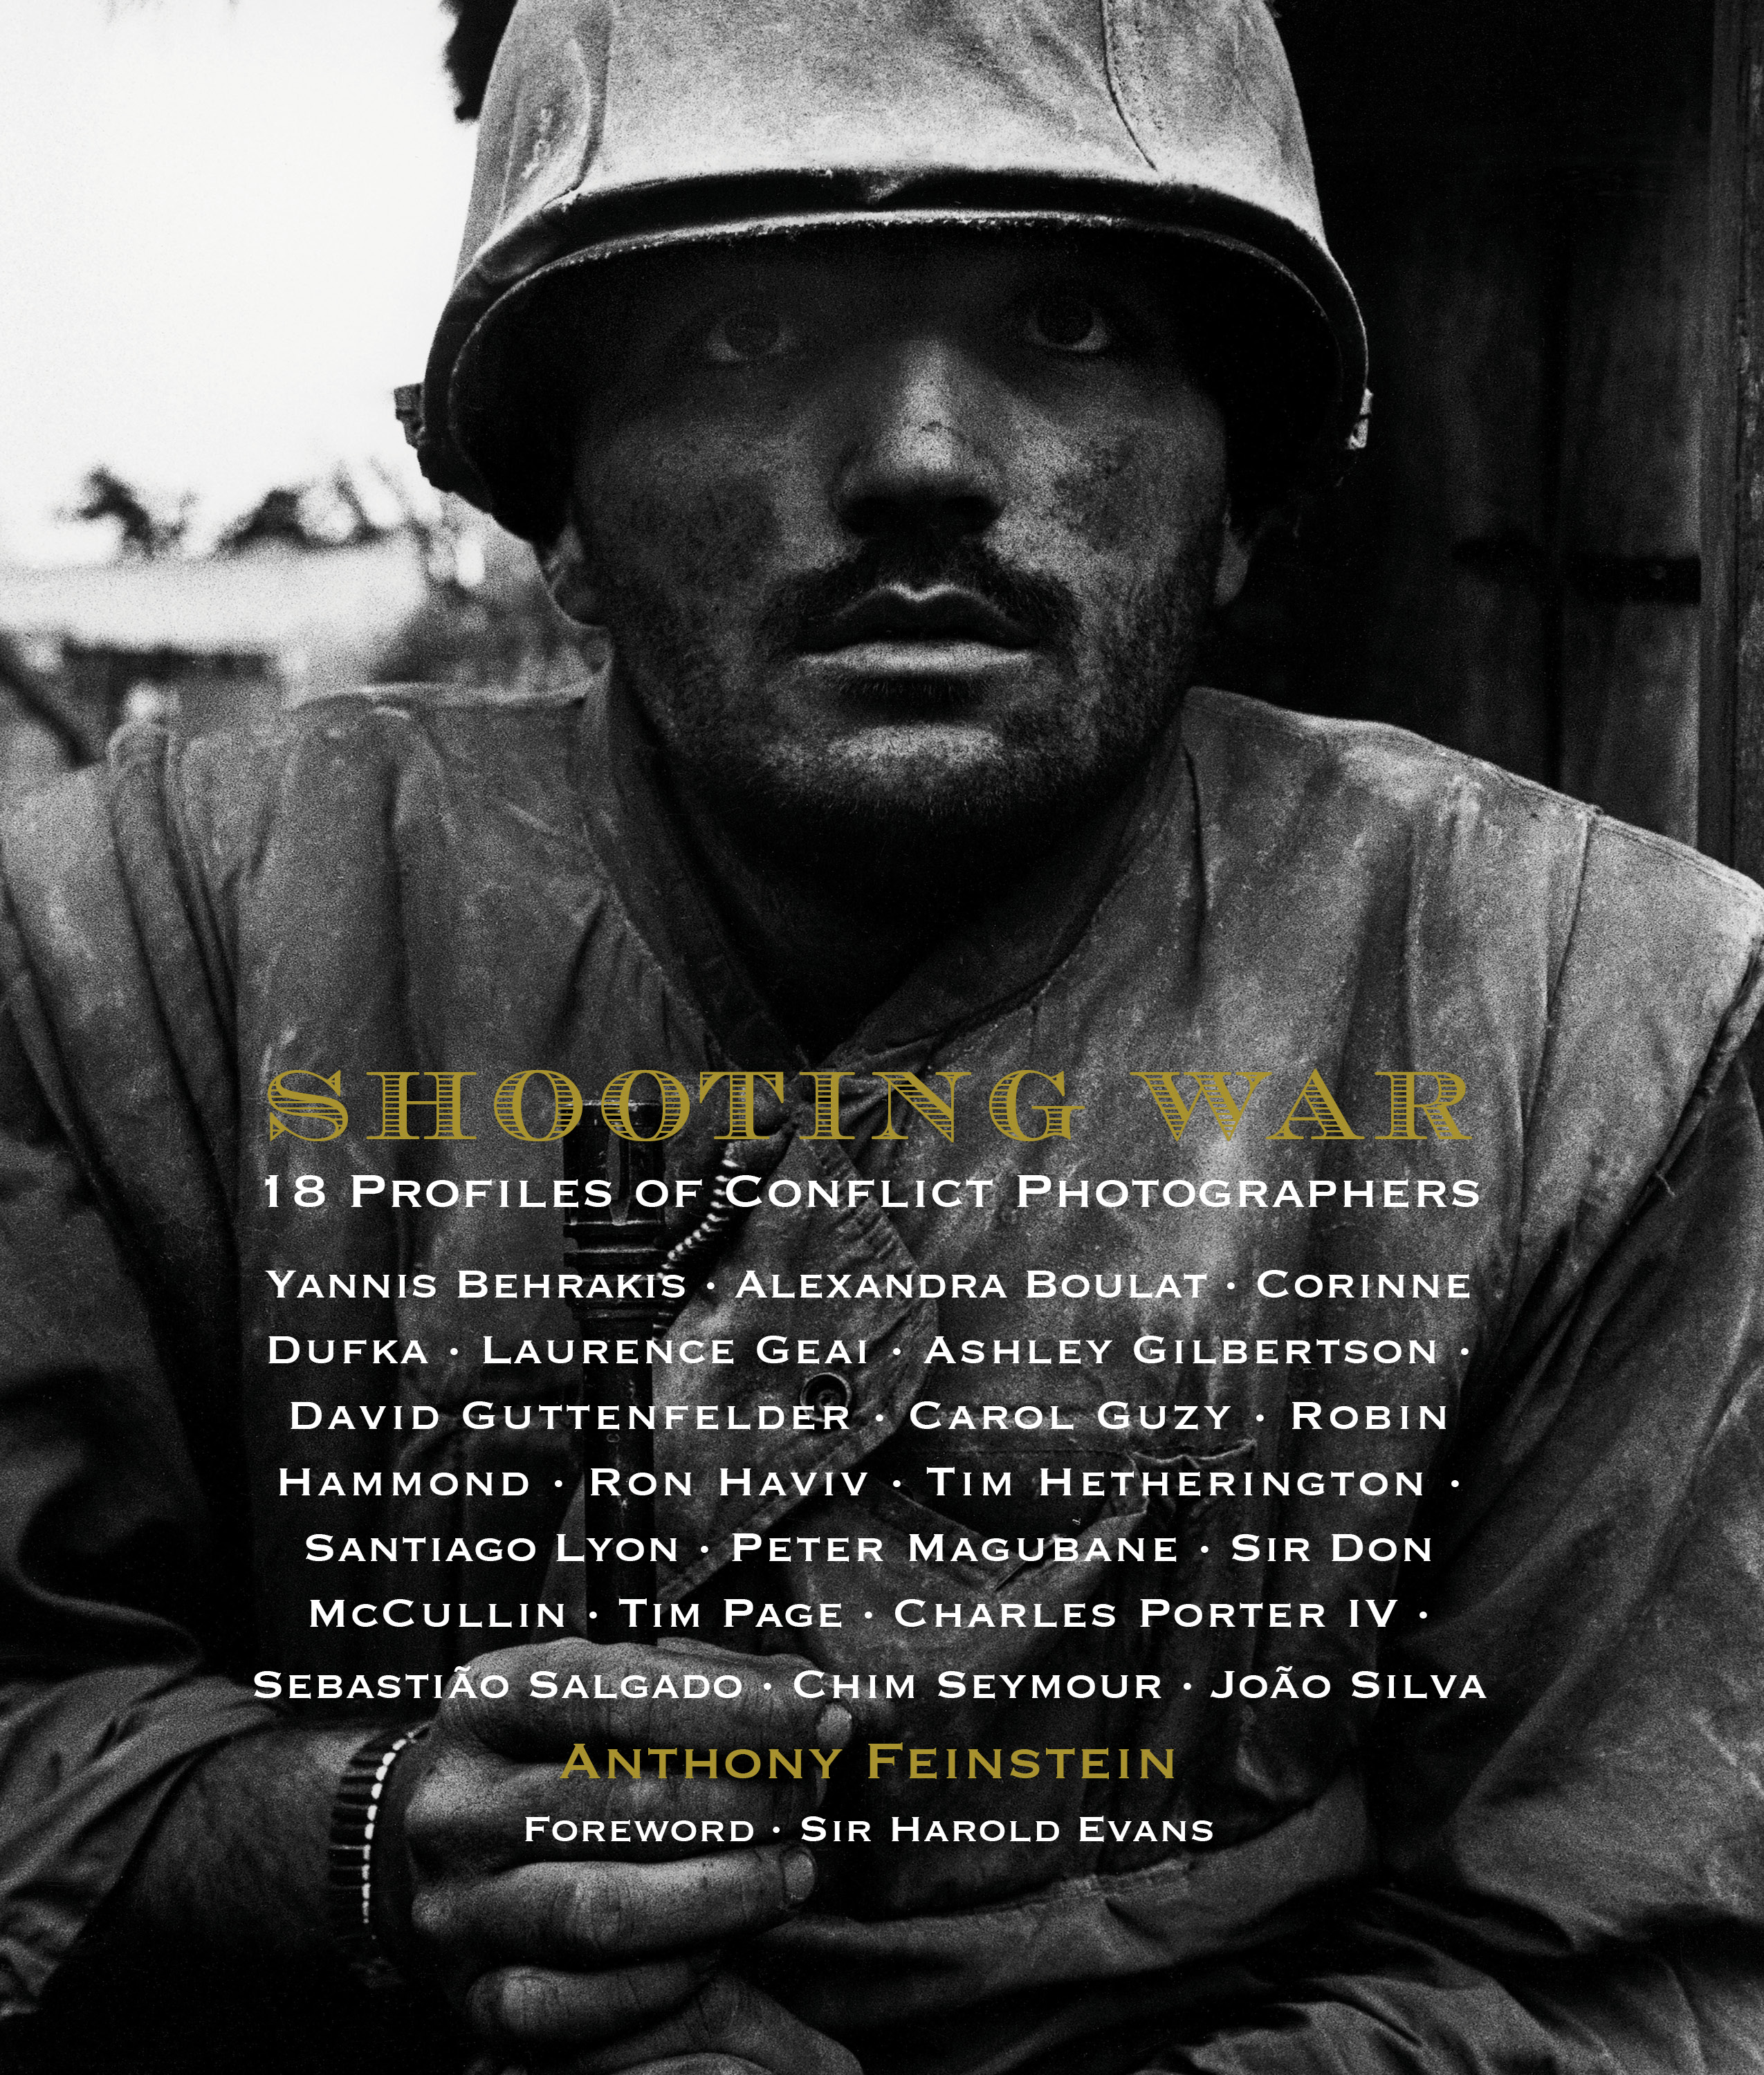 "Shooting War: 18 Profiles of Conflict Photographers" by Anthony Feinstein